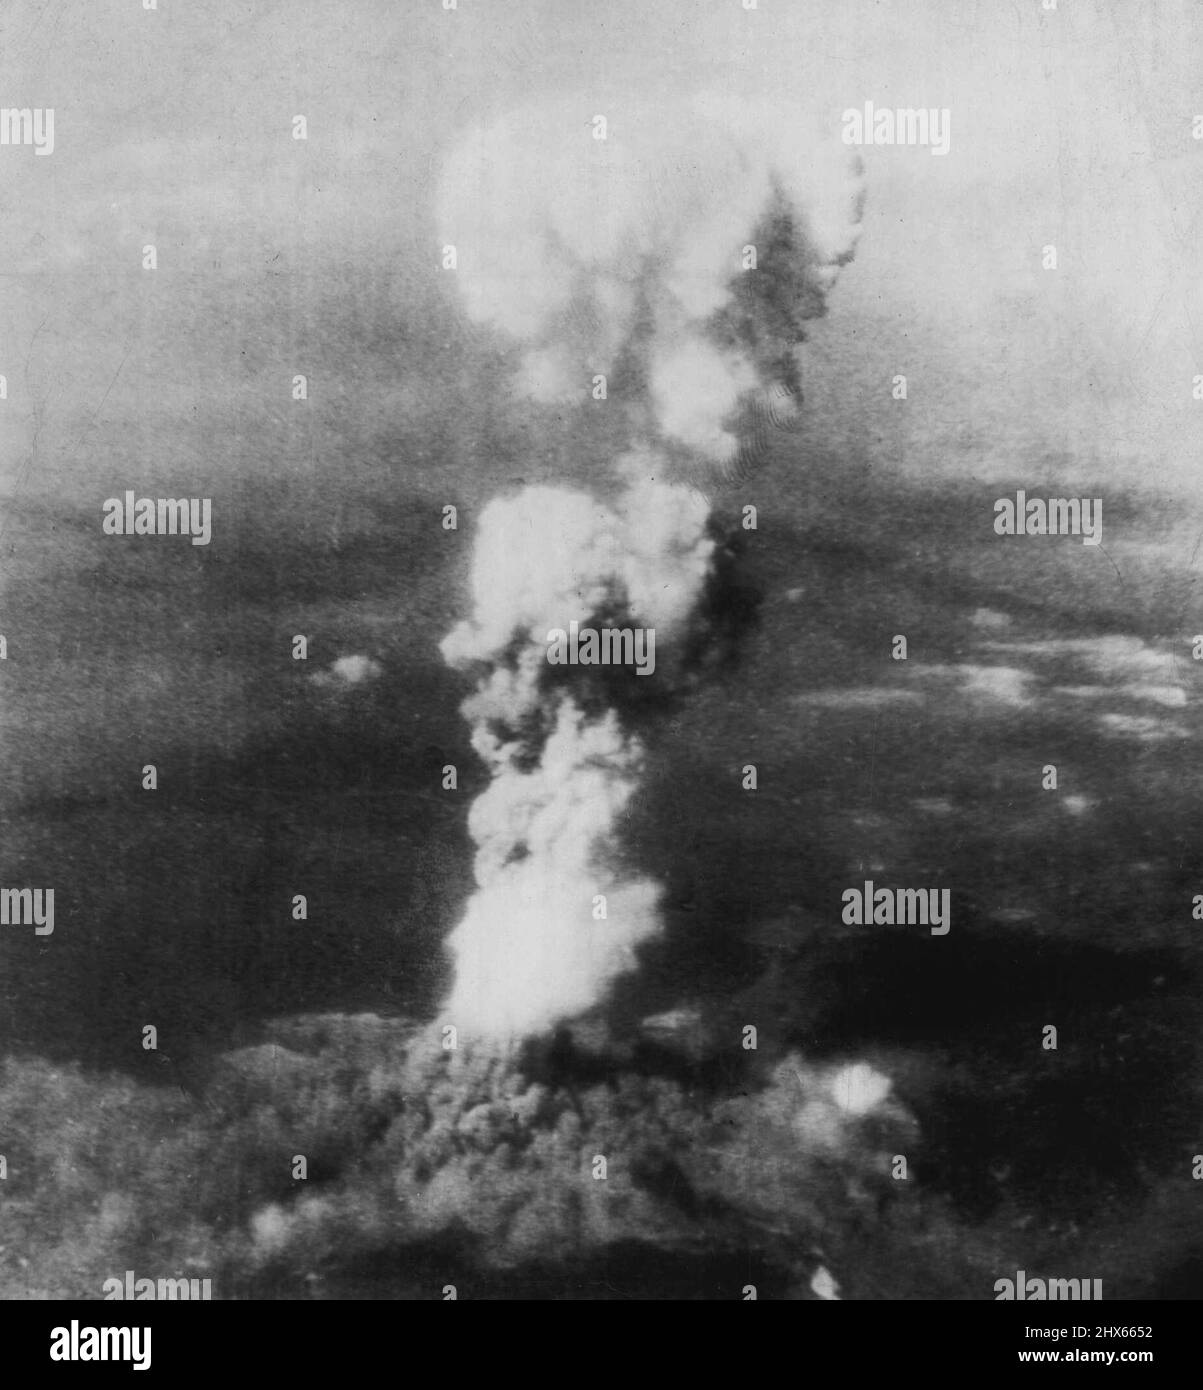 Hiroshima in august 1945 cloud Black and White Stock Photos & Images ...